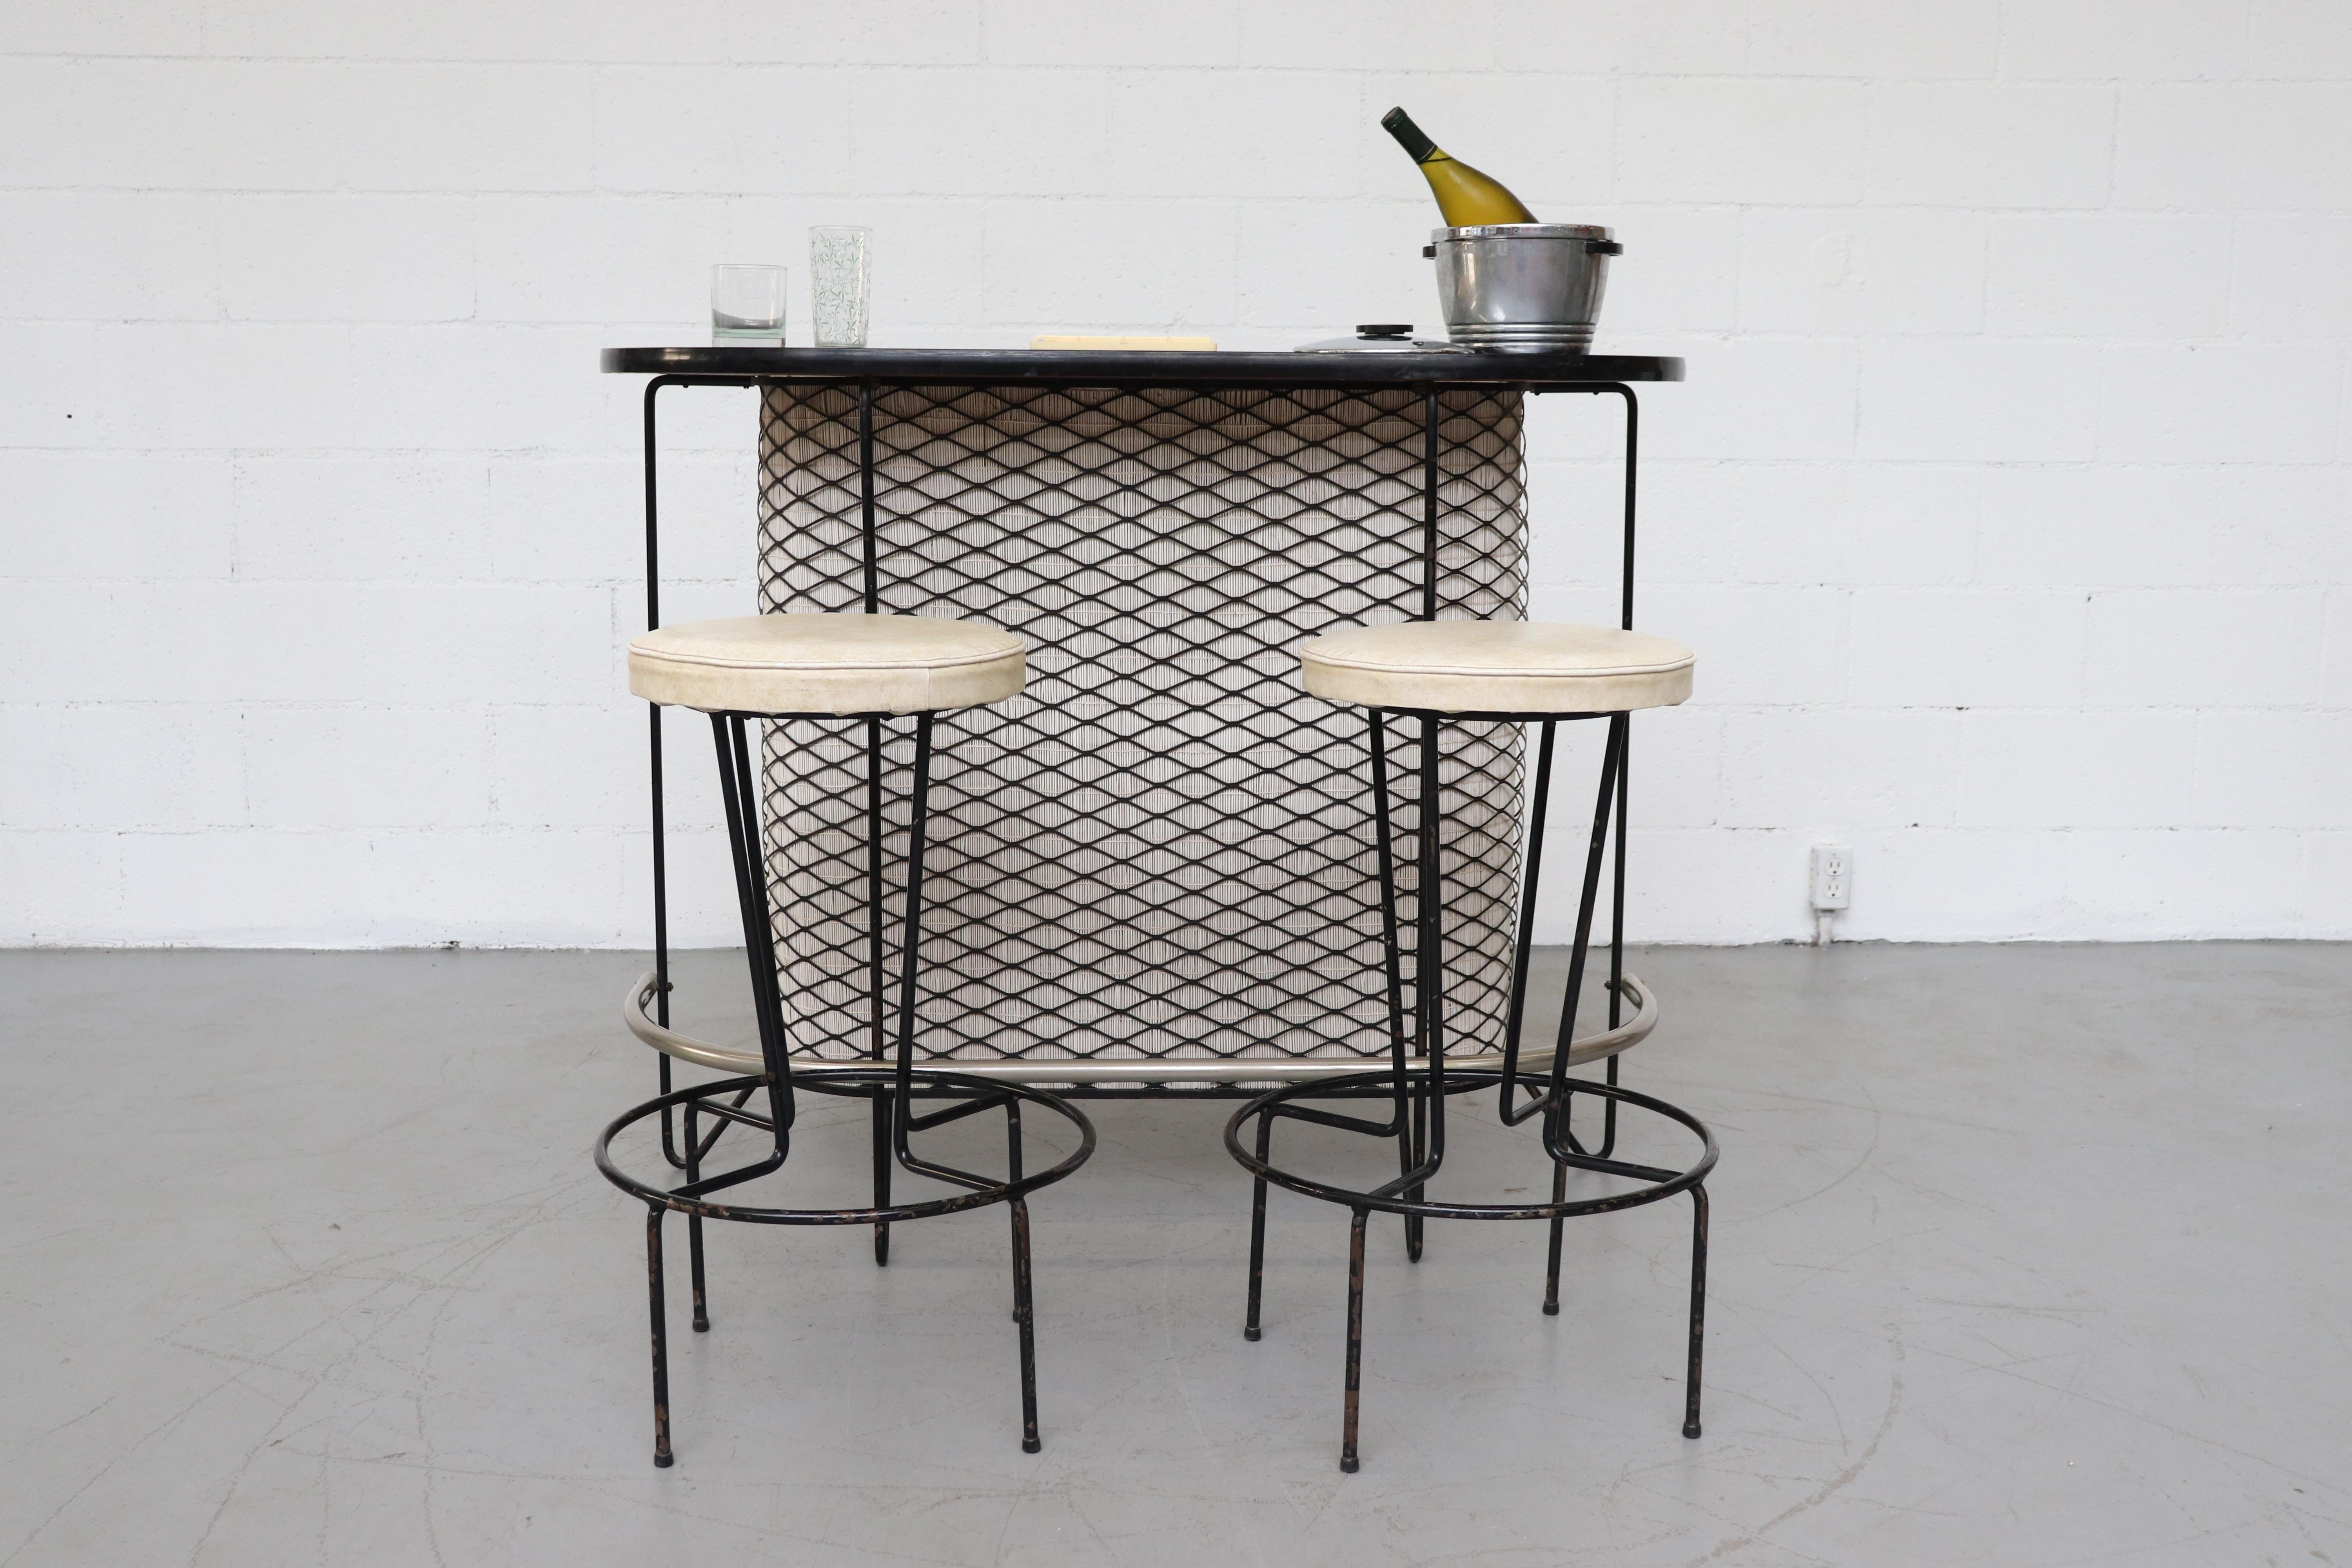 Frederick Weinberg bar midcentury bar and stool set. Bar features cream bamboo panel behind black metal screen. Stools measure: 18.5 x 14 x 28.5 with cream upholstered seats and black enameled metal legs. Very original condition with visual wear and